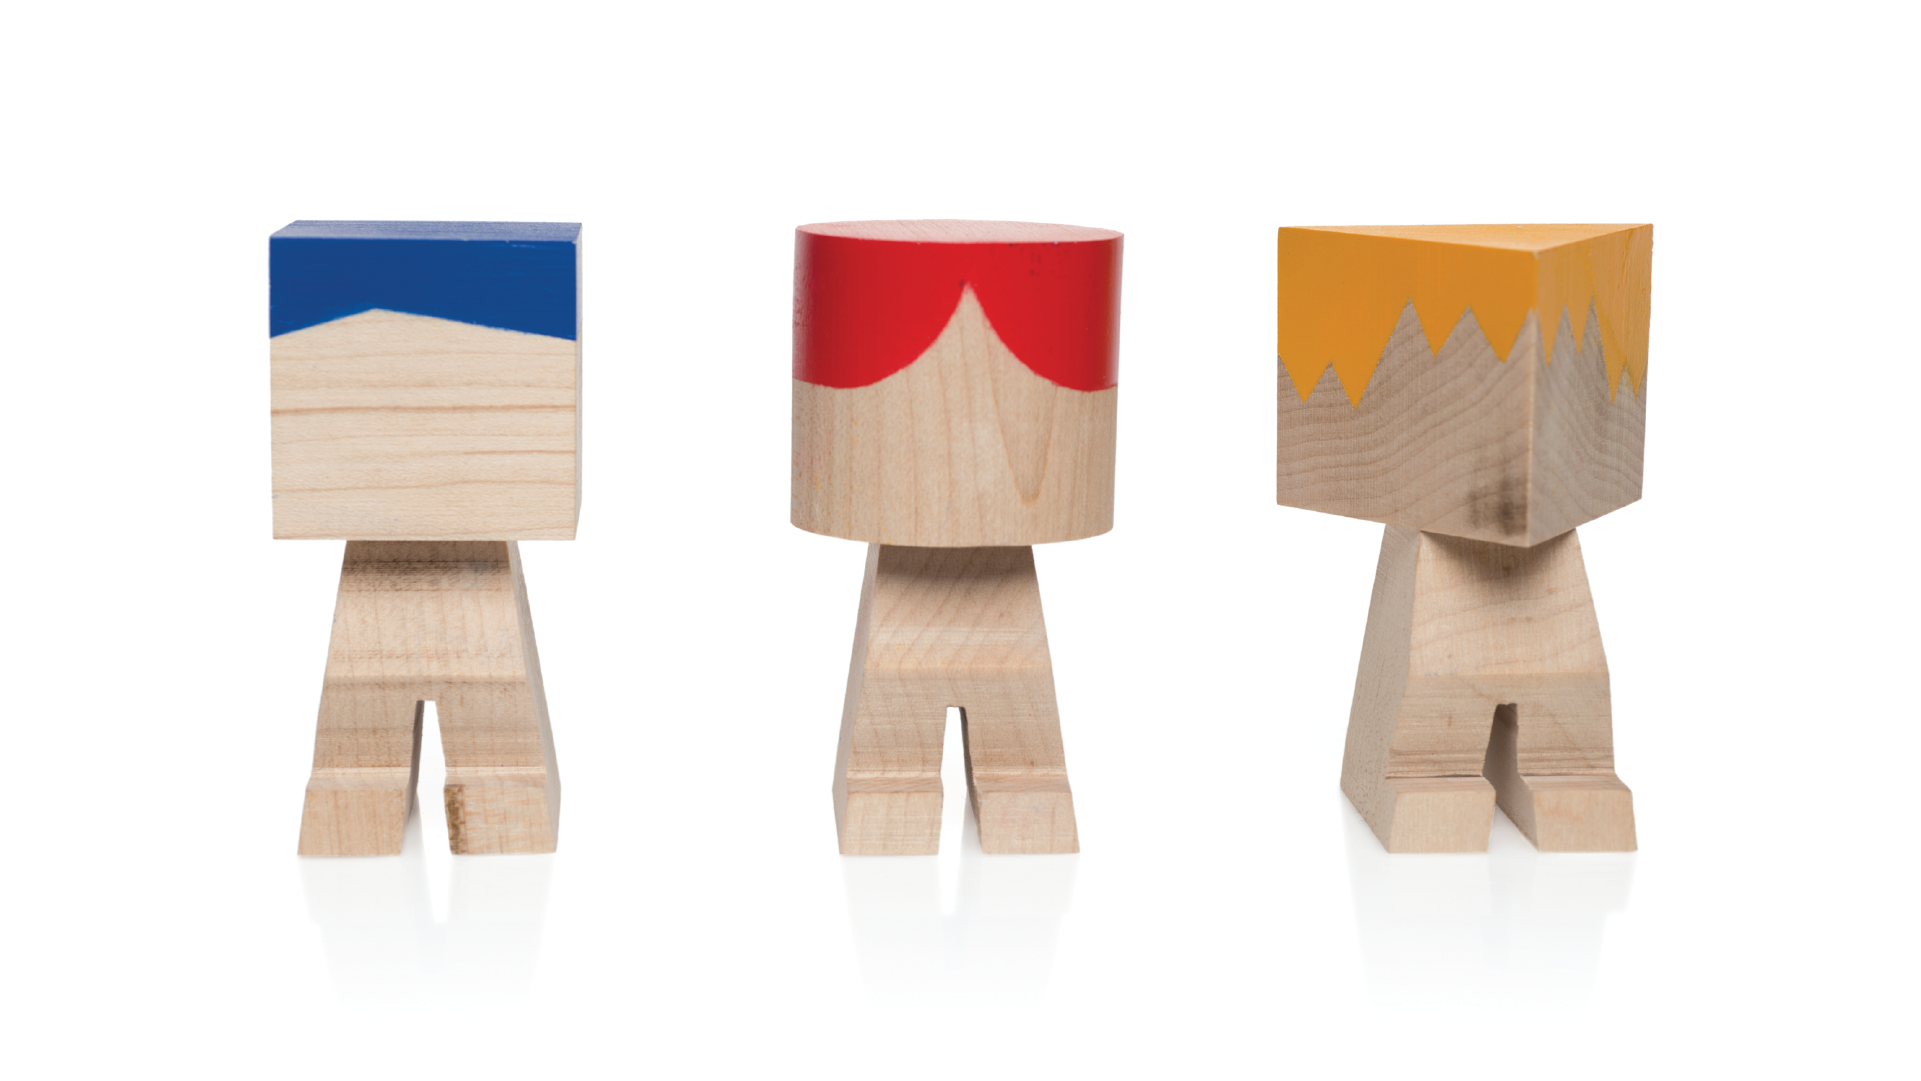 three wooden mini figures with different body shapes. From left to right, blue square, Red cylinder, Yellow triangle.